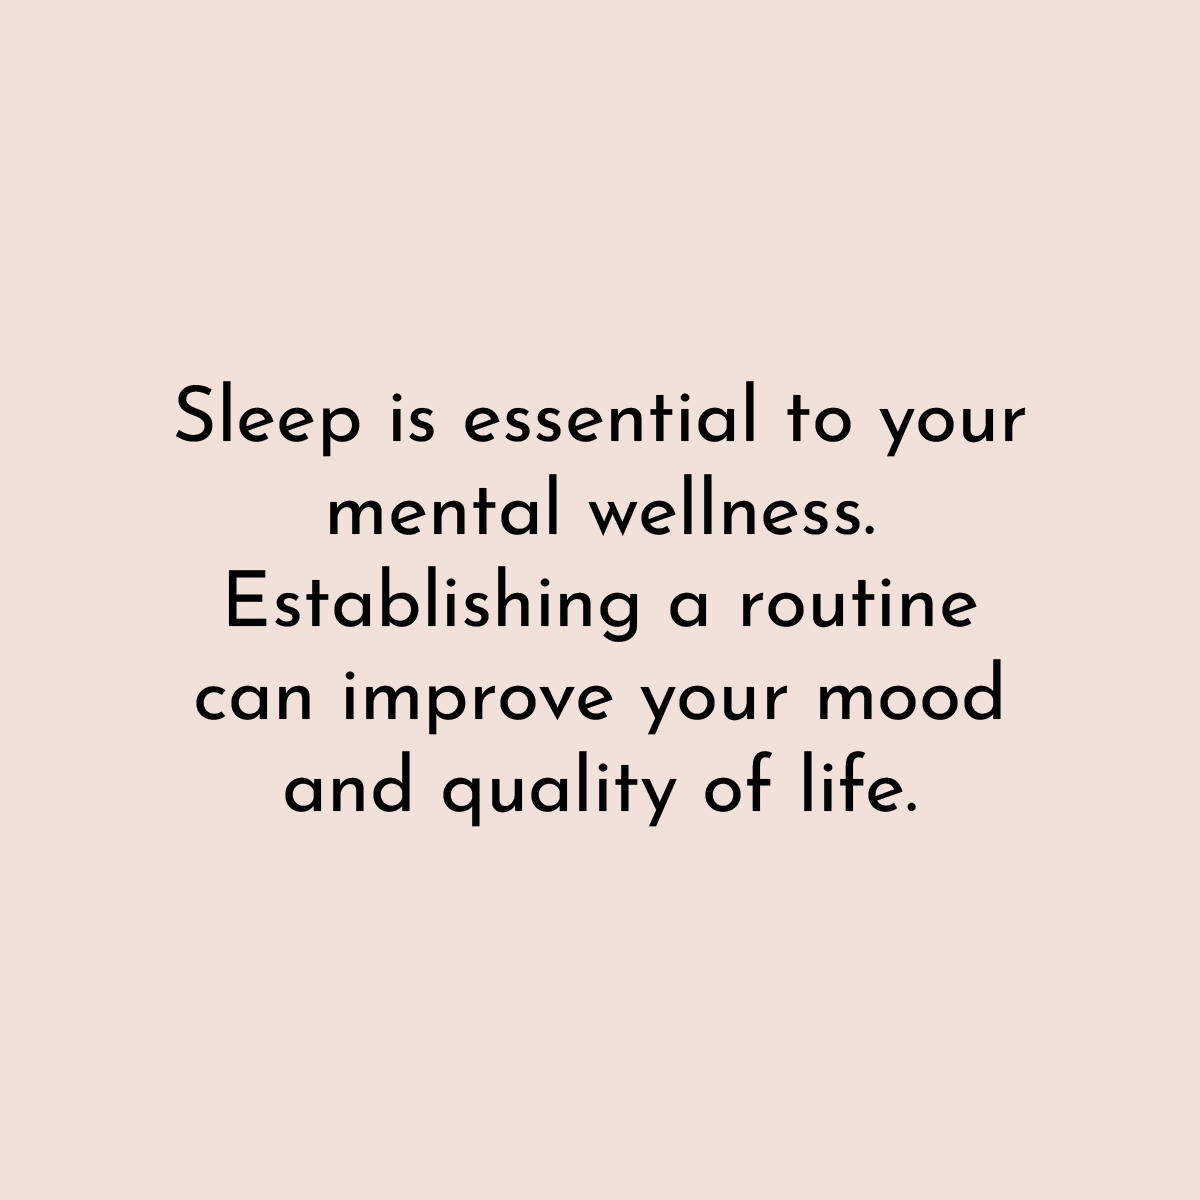 Sleep is essential to your mental wellness. Establishing a routine can improve your mood and quality of life.